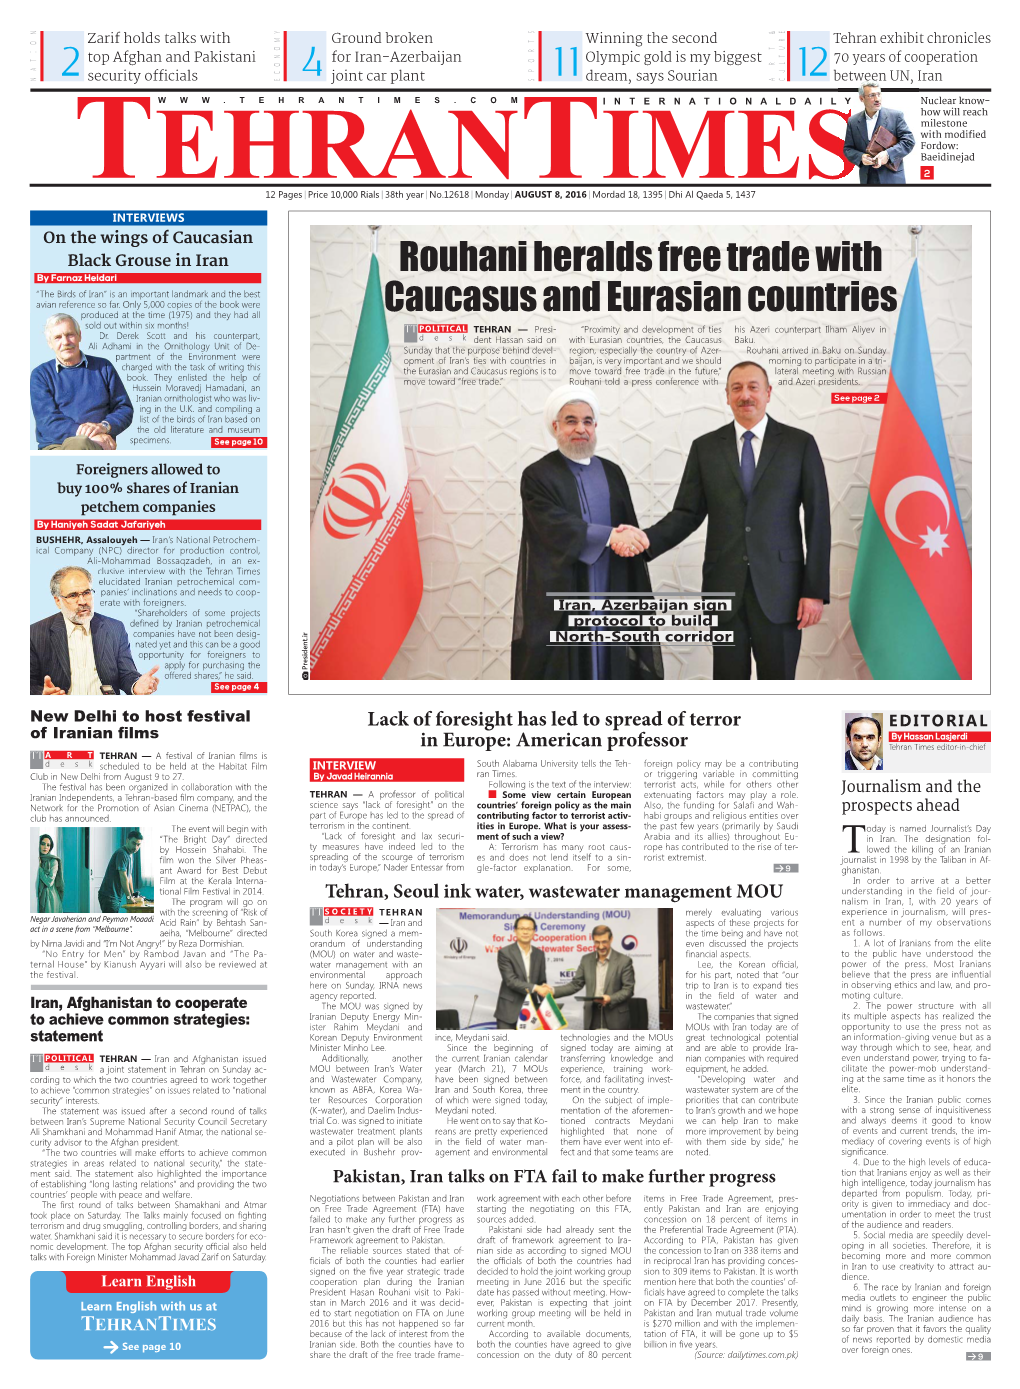 Rouhani Heralds Free Trade with Caucasus and Eurasian Countries